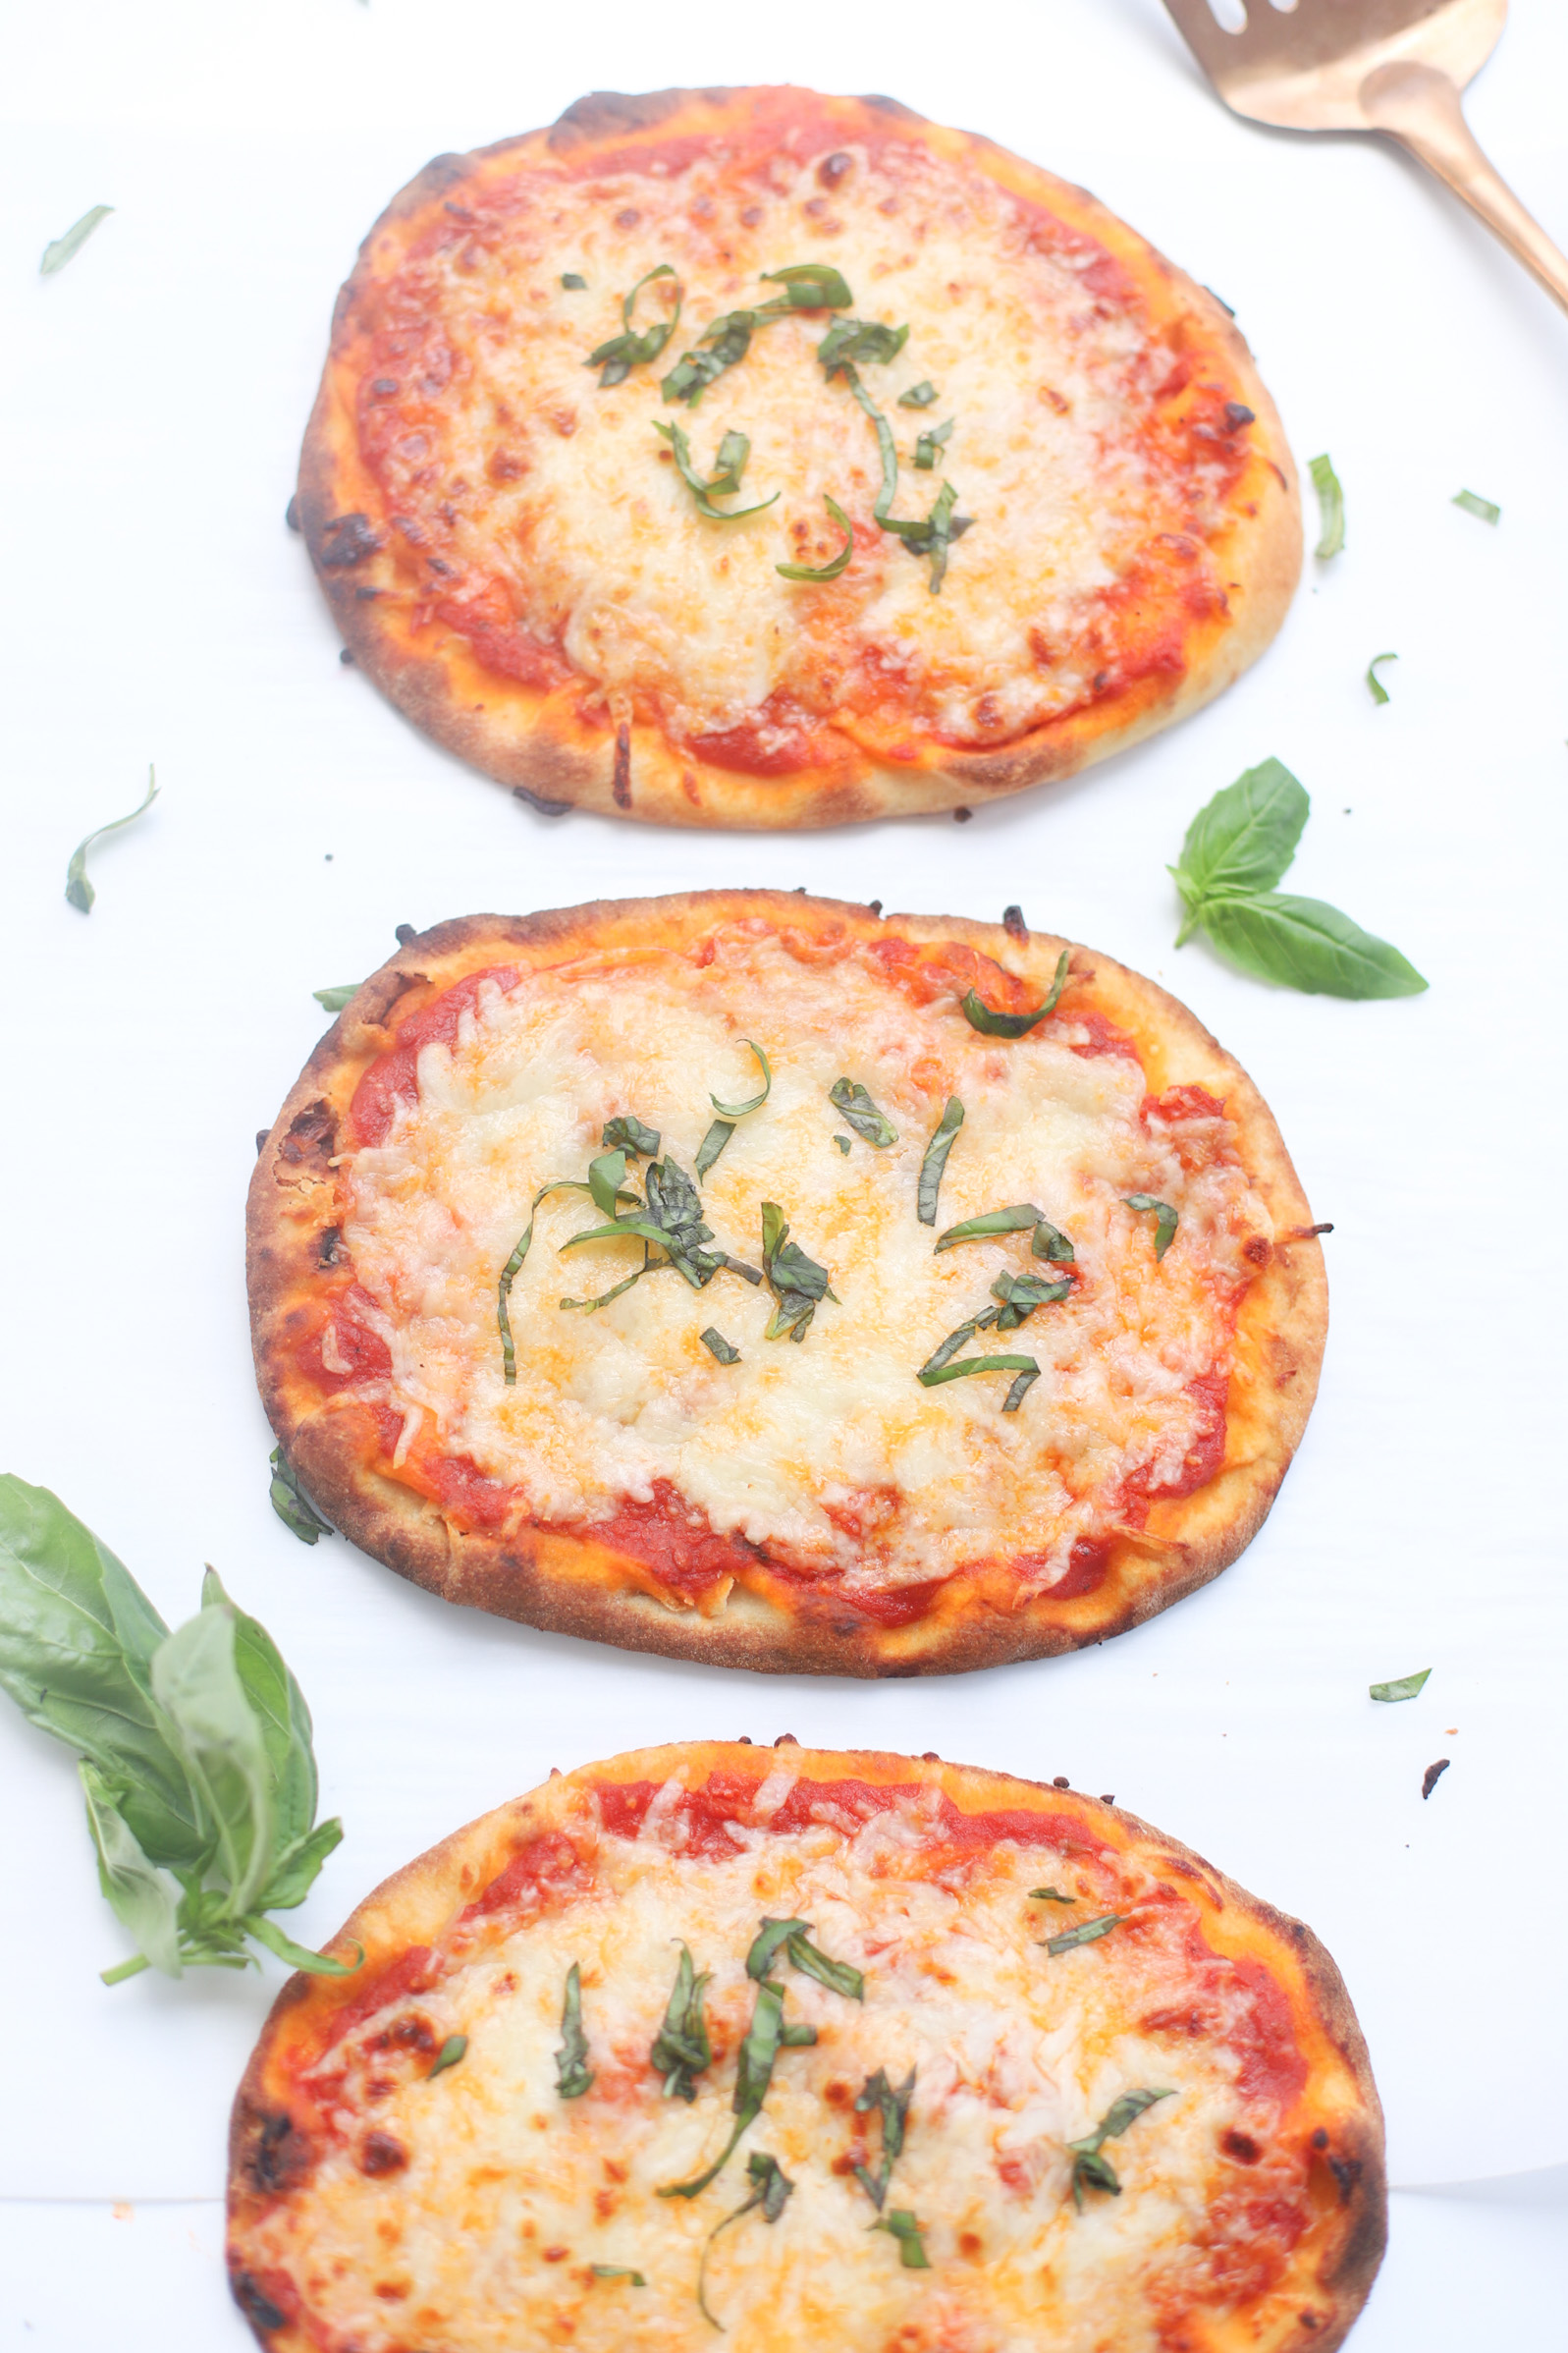 Our Favorite 10-Minute Naan Bread Pizza recipe bakes up with a crispy, golden crust, is topped with tomato sauce and bubbly cheese, and is so easy to make. The whole family loves making and eating these delicious simple at-home pizzas for lunch and dinner! | glitterinc.com | @glitterinc